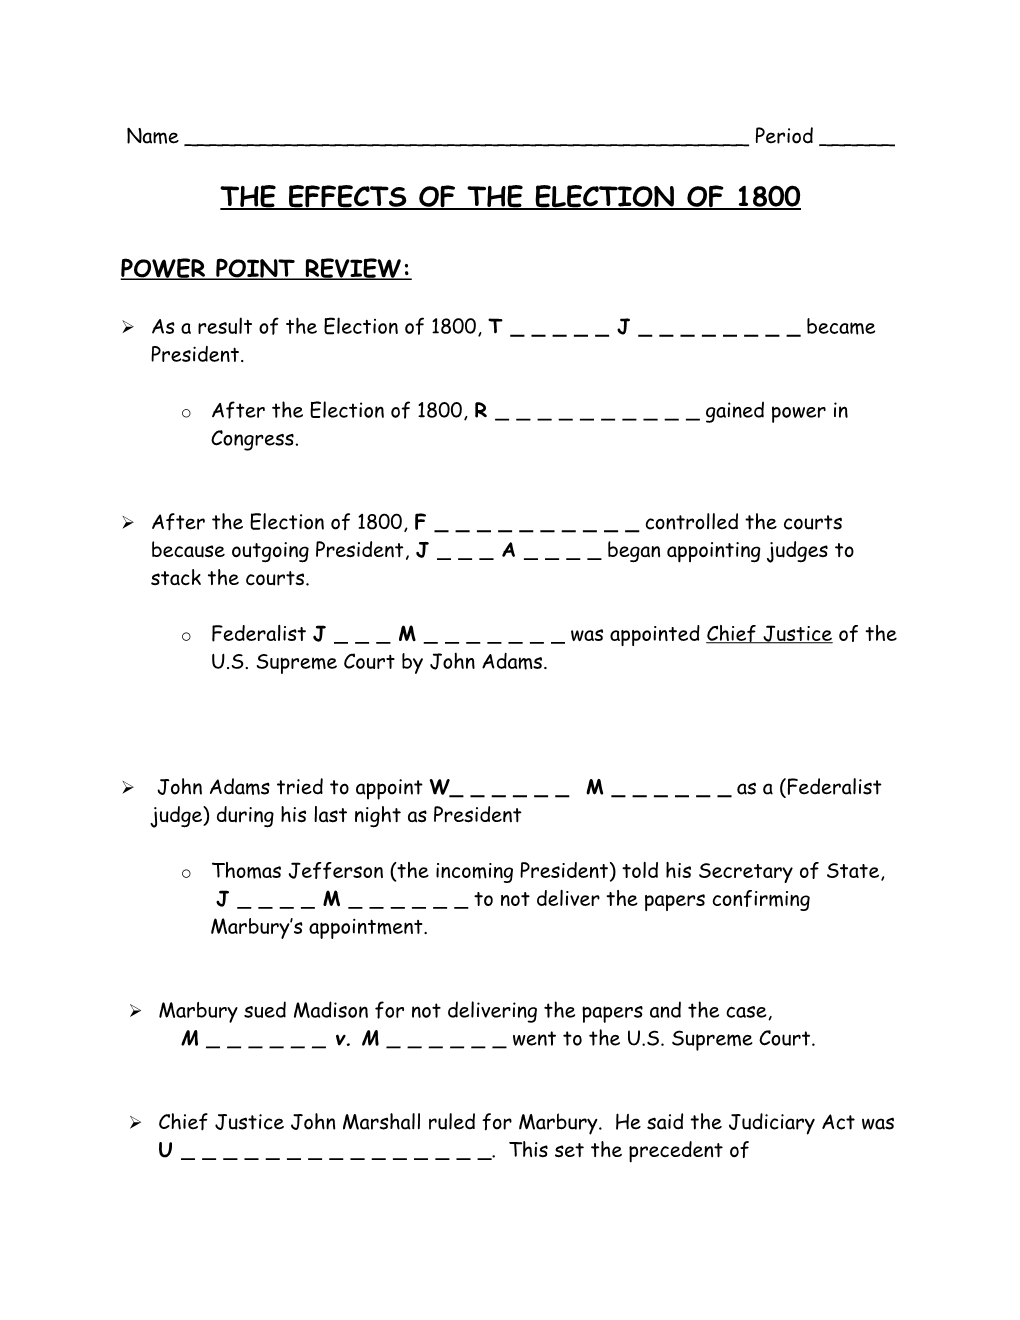 The Effects of the Election of 1800